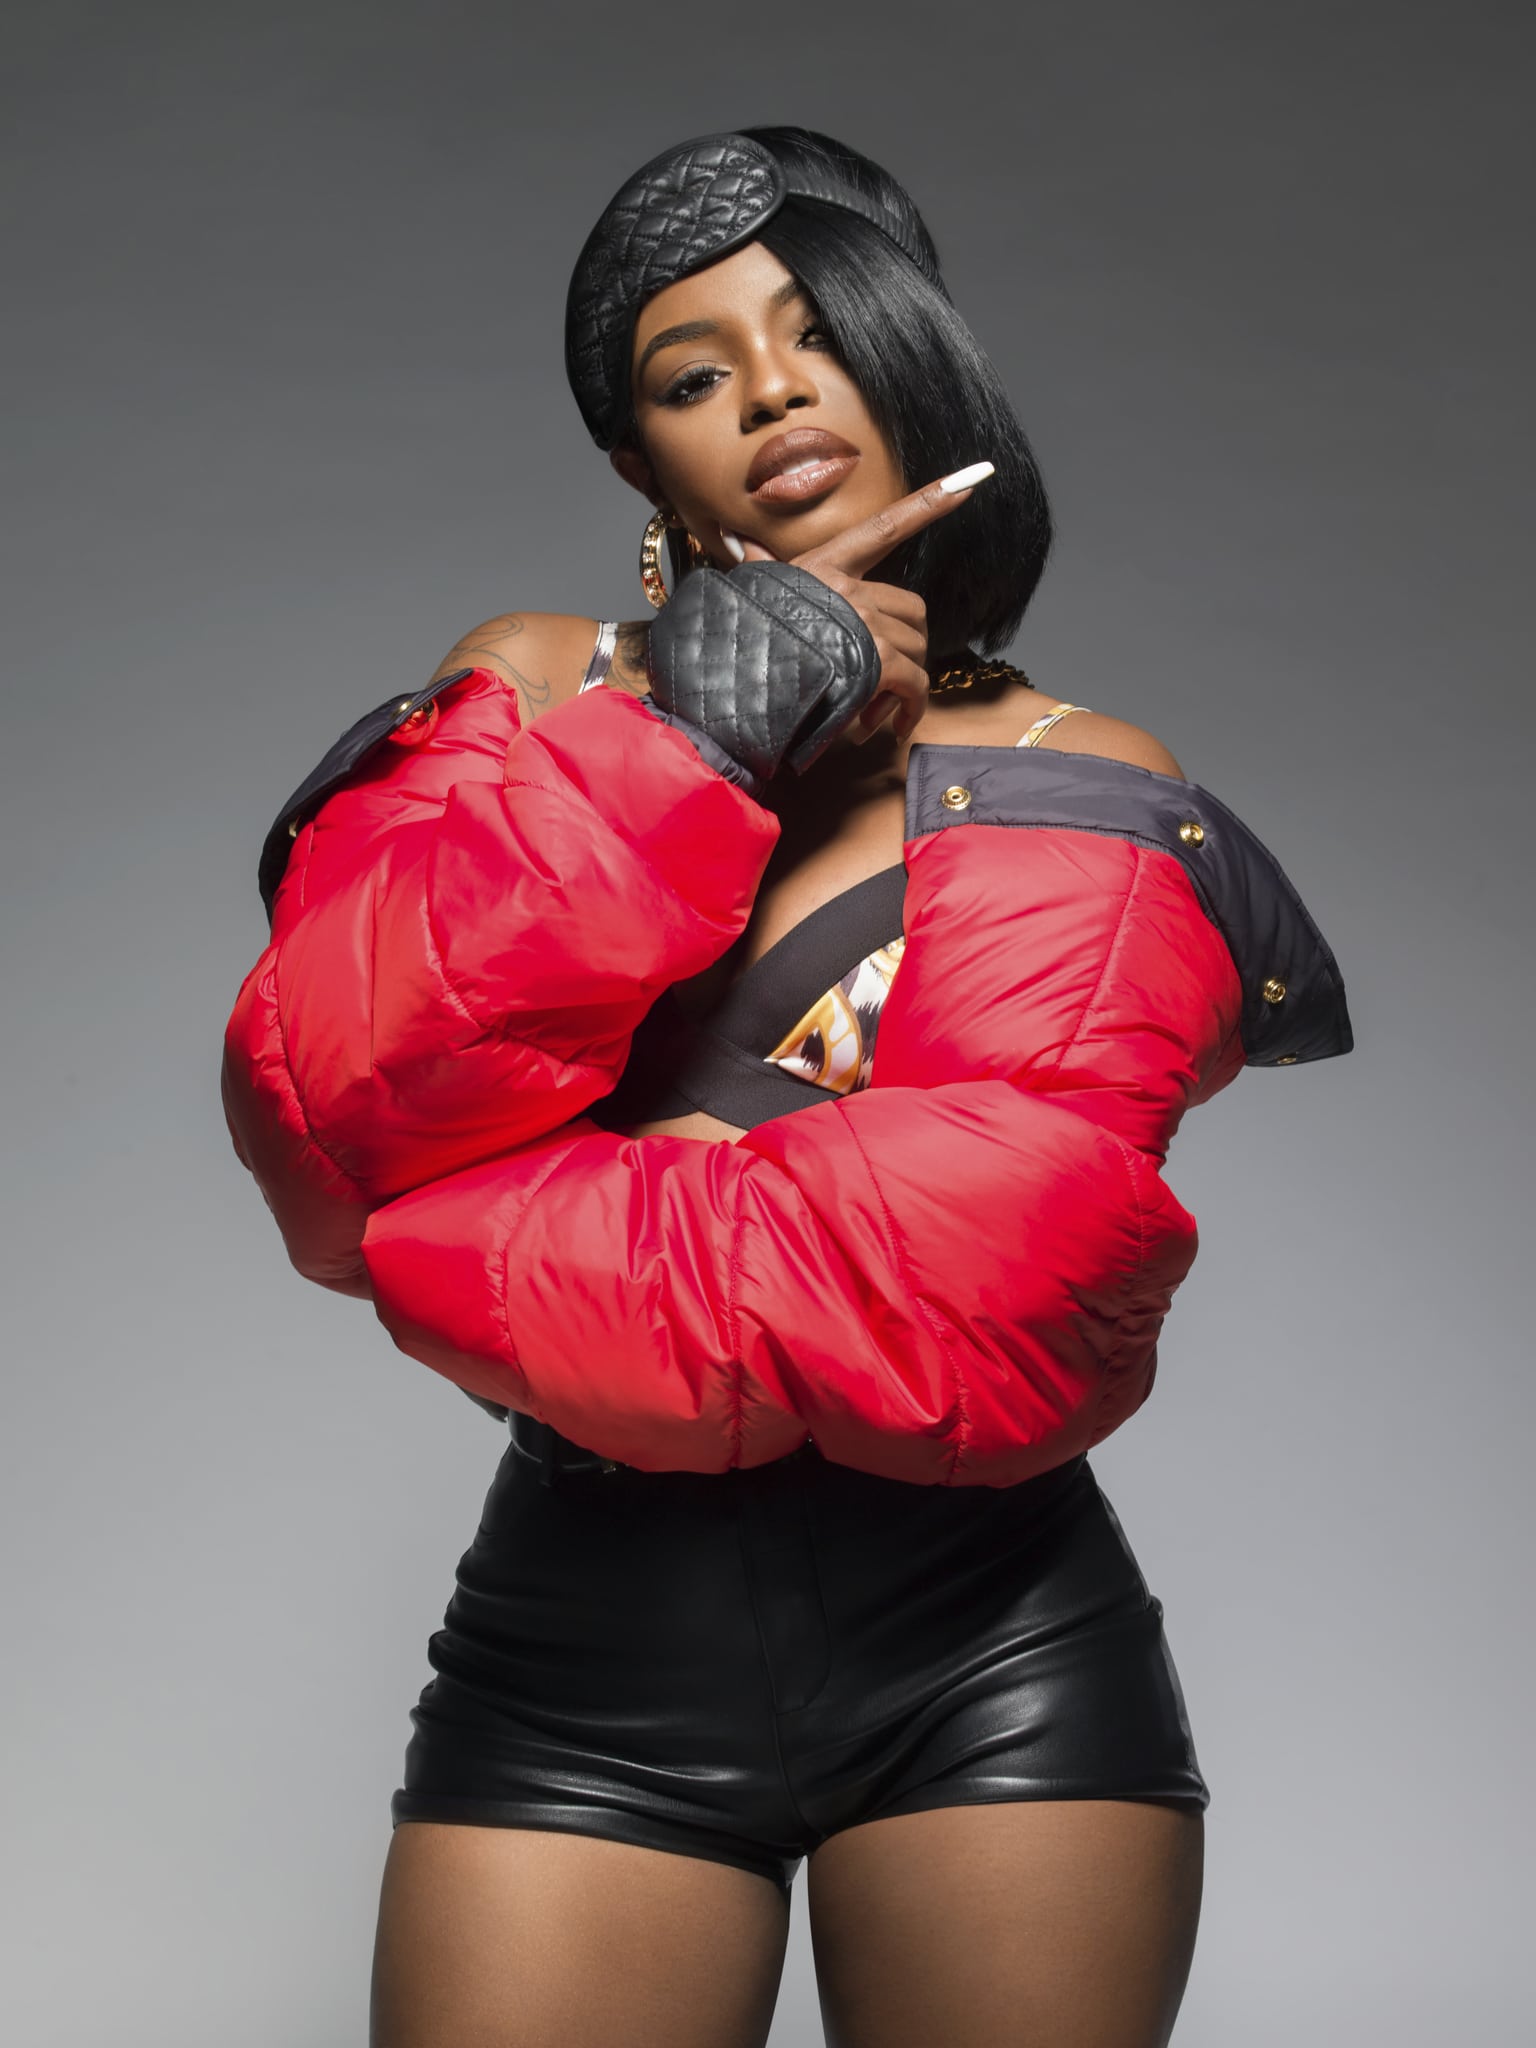 ESSENCE Fest 2019: Dreezy, Wale, King Combs,Young M.A, August Alsina & More To Perform For ESSENCE After Dark Series